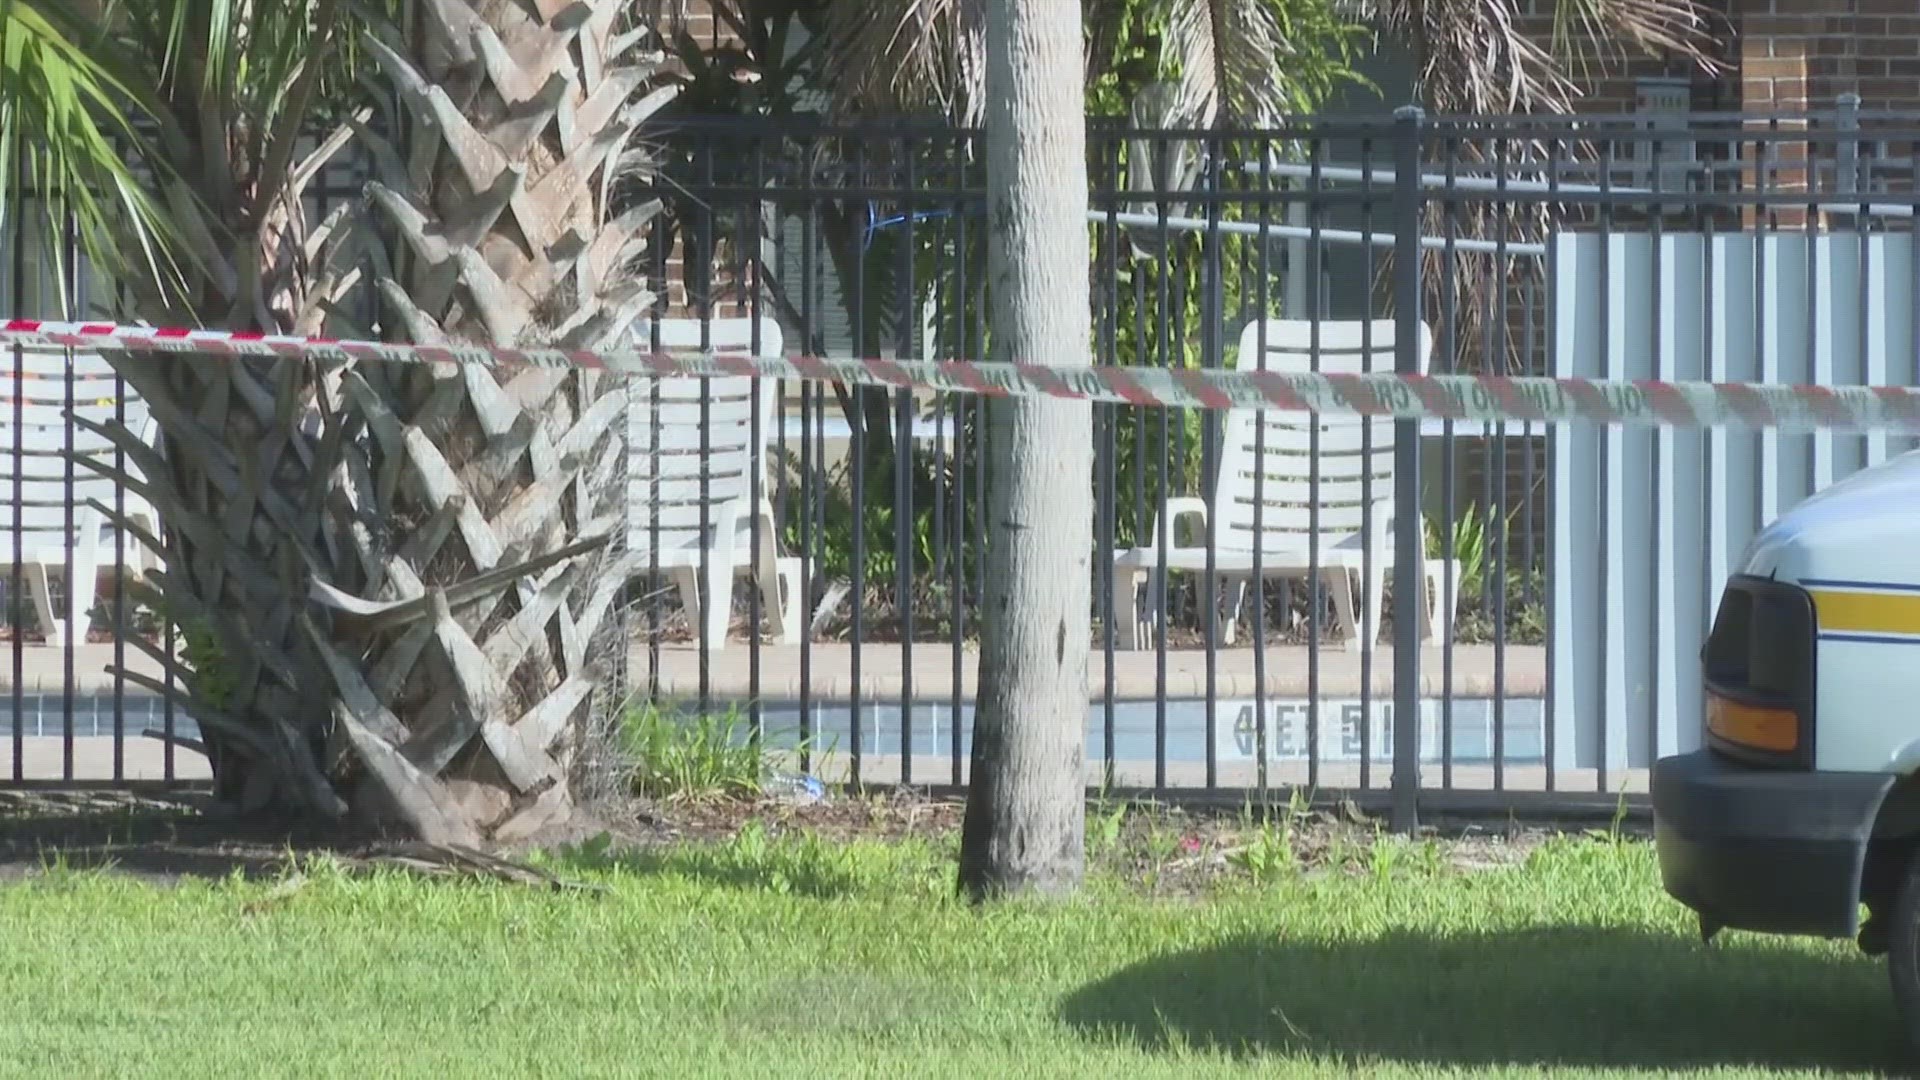 JSO says at approximately 6:45 a.m. on Thursday, officers responded to the apartments and took the woman out the pool. When JFRD arrived, they pronounced her dead.